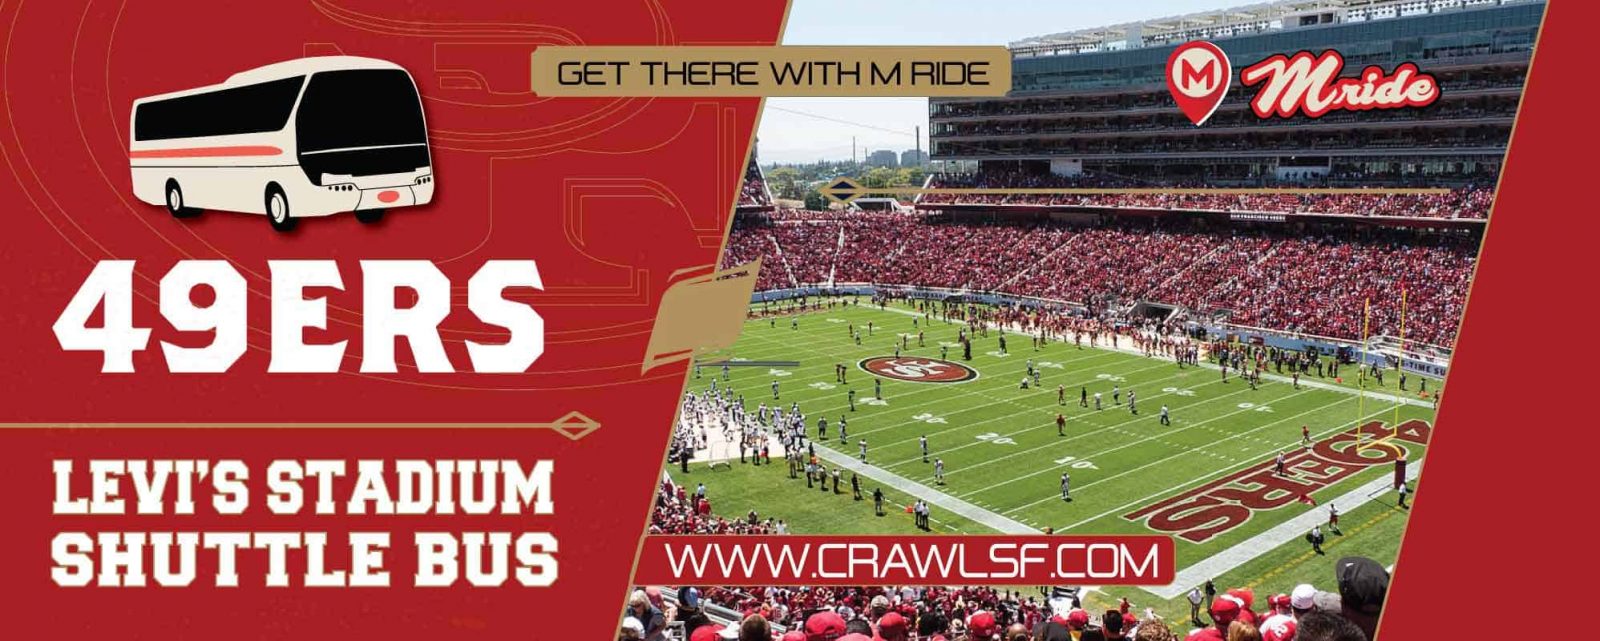 San Francisco 49ers vs Los Angeles Chargers - CrawlSF